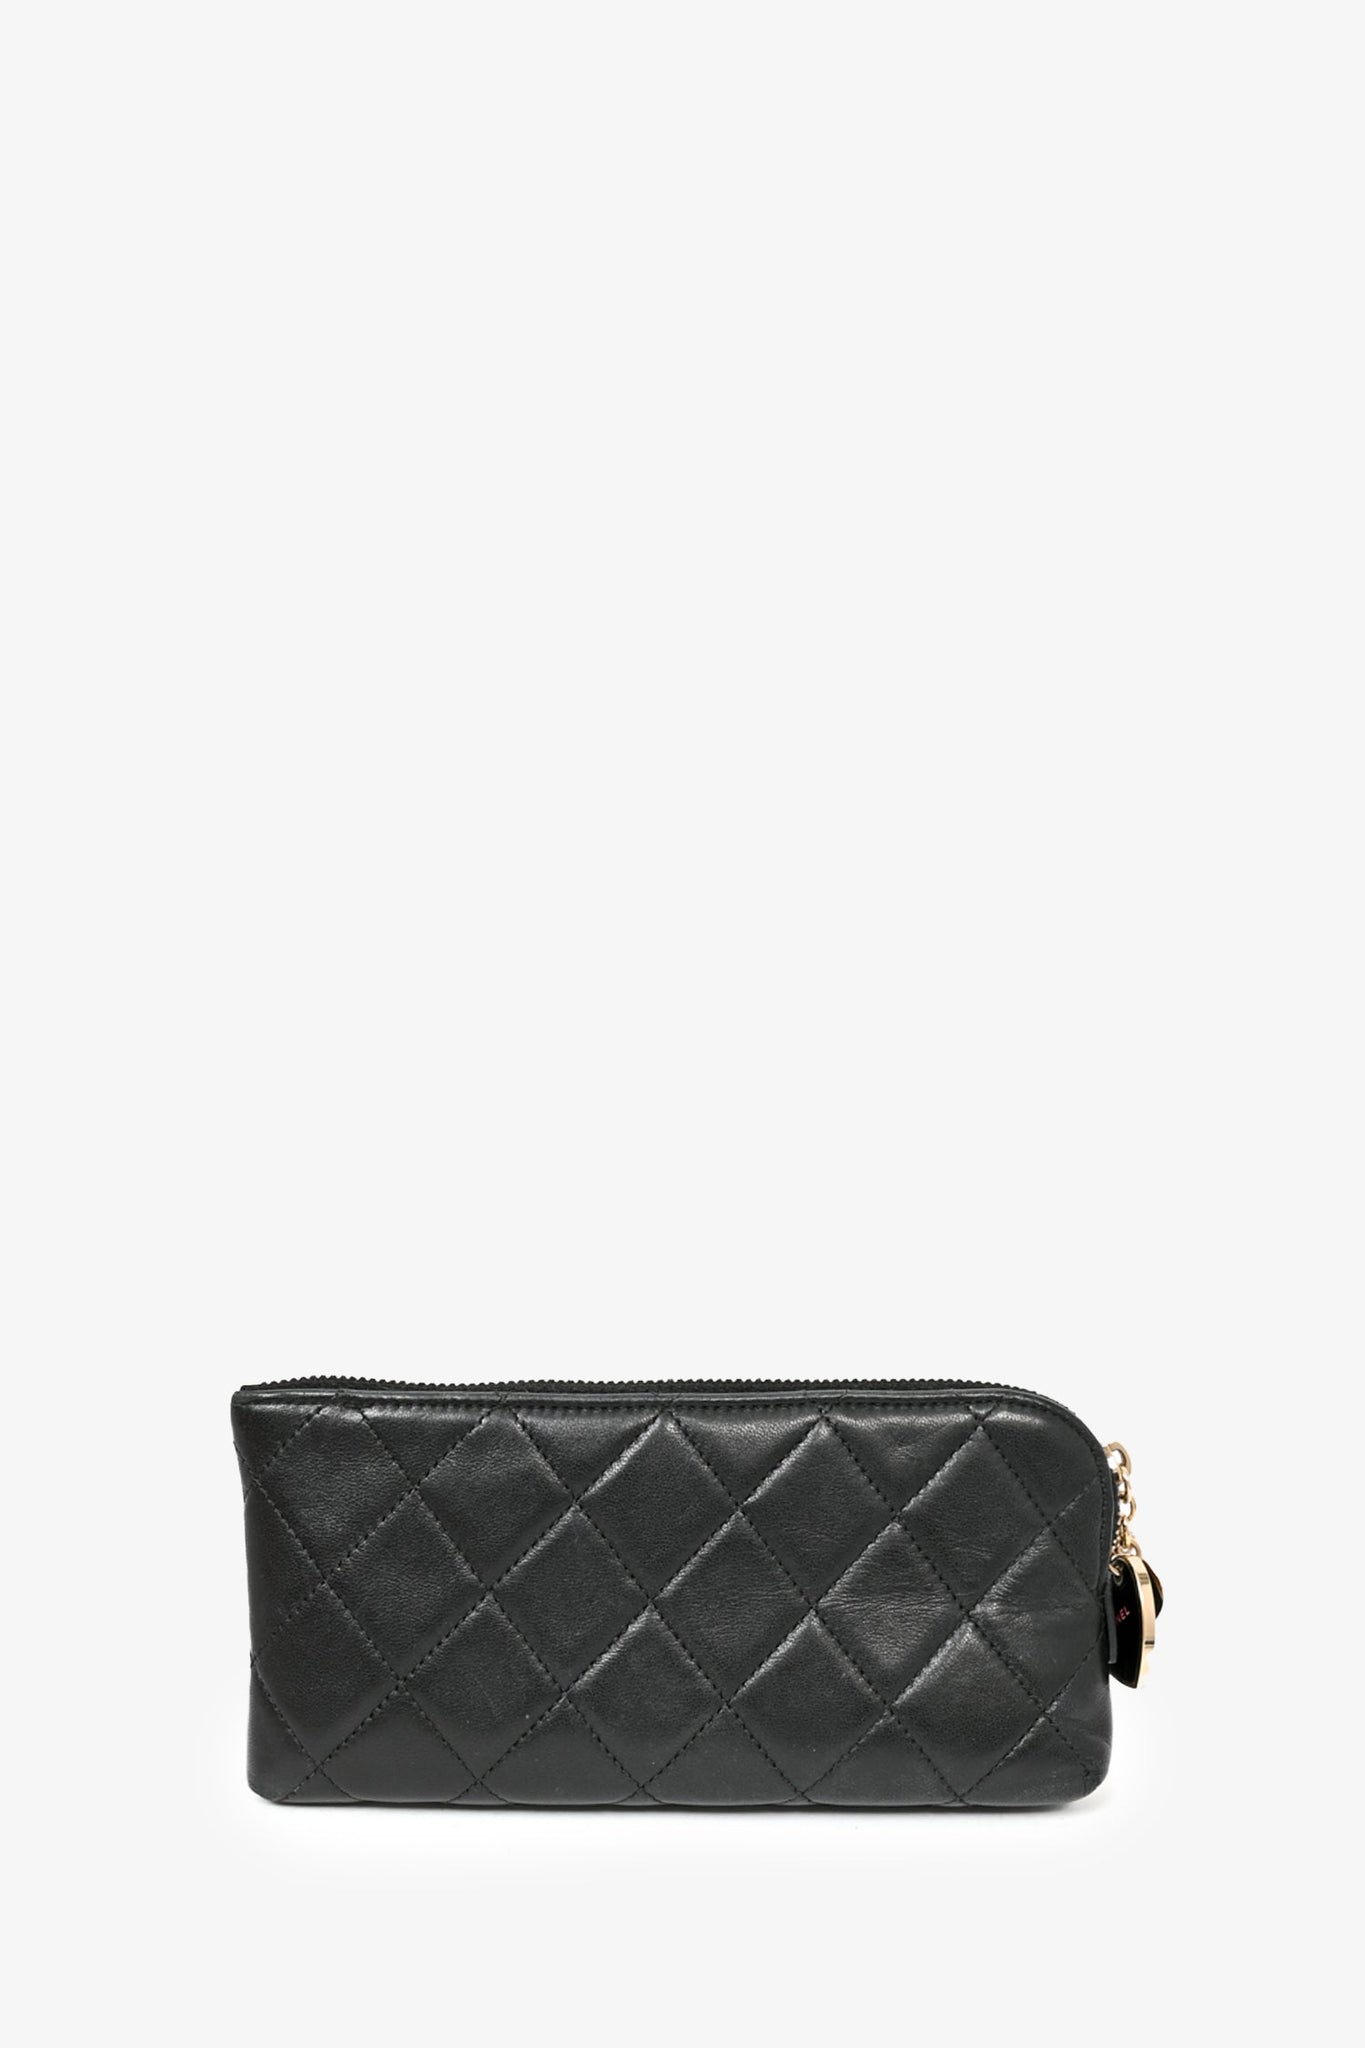 Chanel Black Quilted Leather 'Porte Bonheur' Limited Edition Valentine's  Case w/ Charm